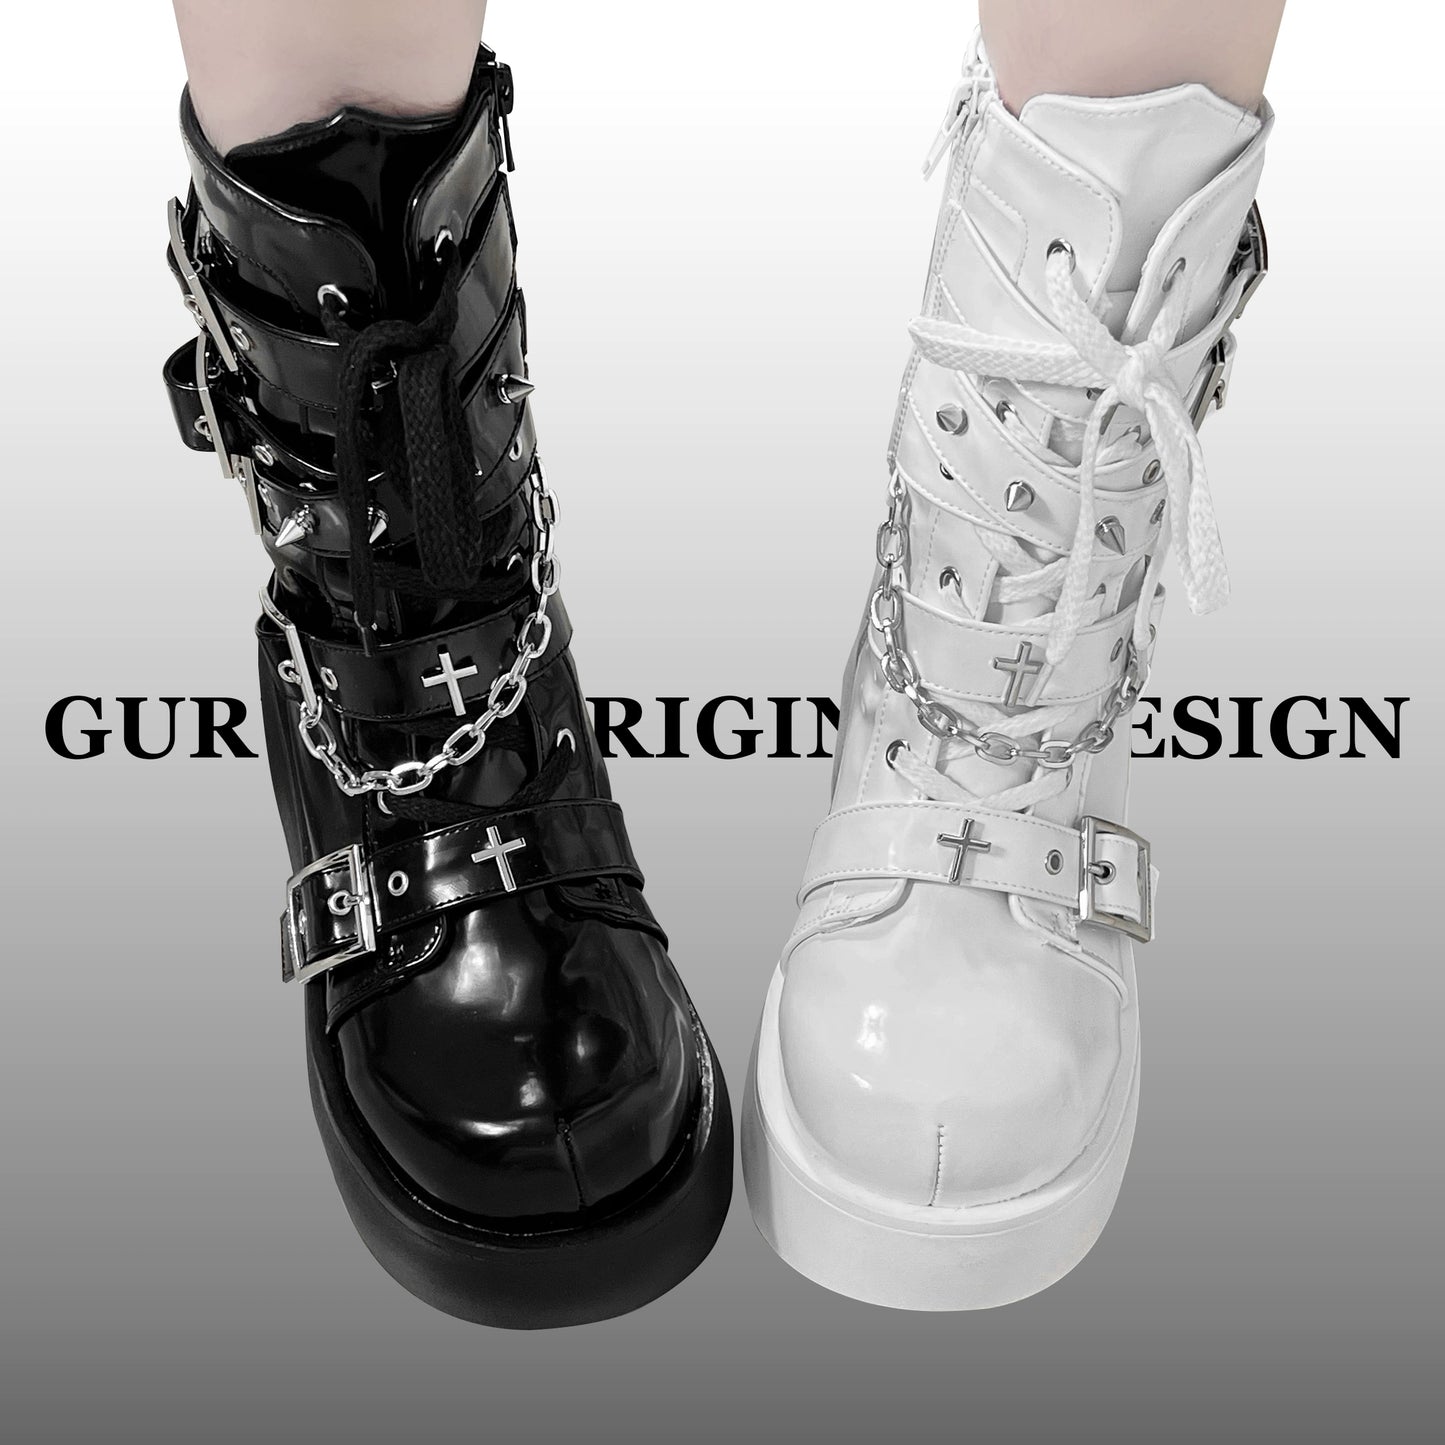 Y2K Spicy Girl Cross Black White Platform Shoes Boots 28962:343864